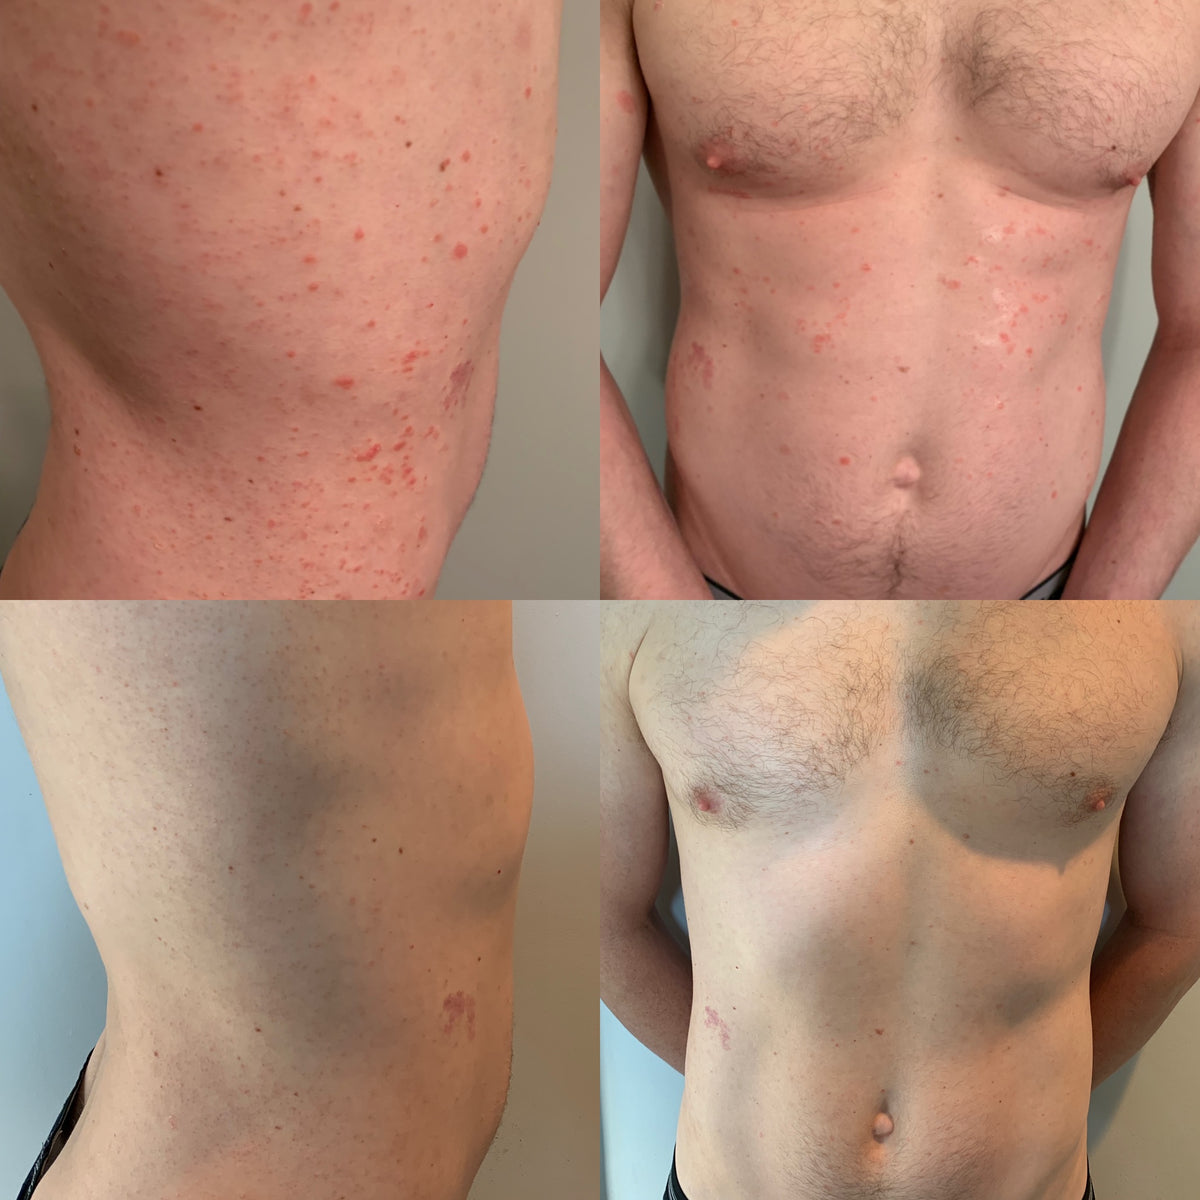 Kenkoderm Soap Results - Psoriasis Before and After